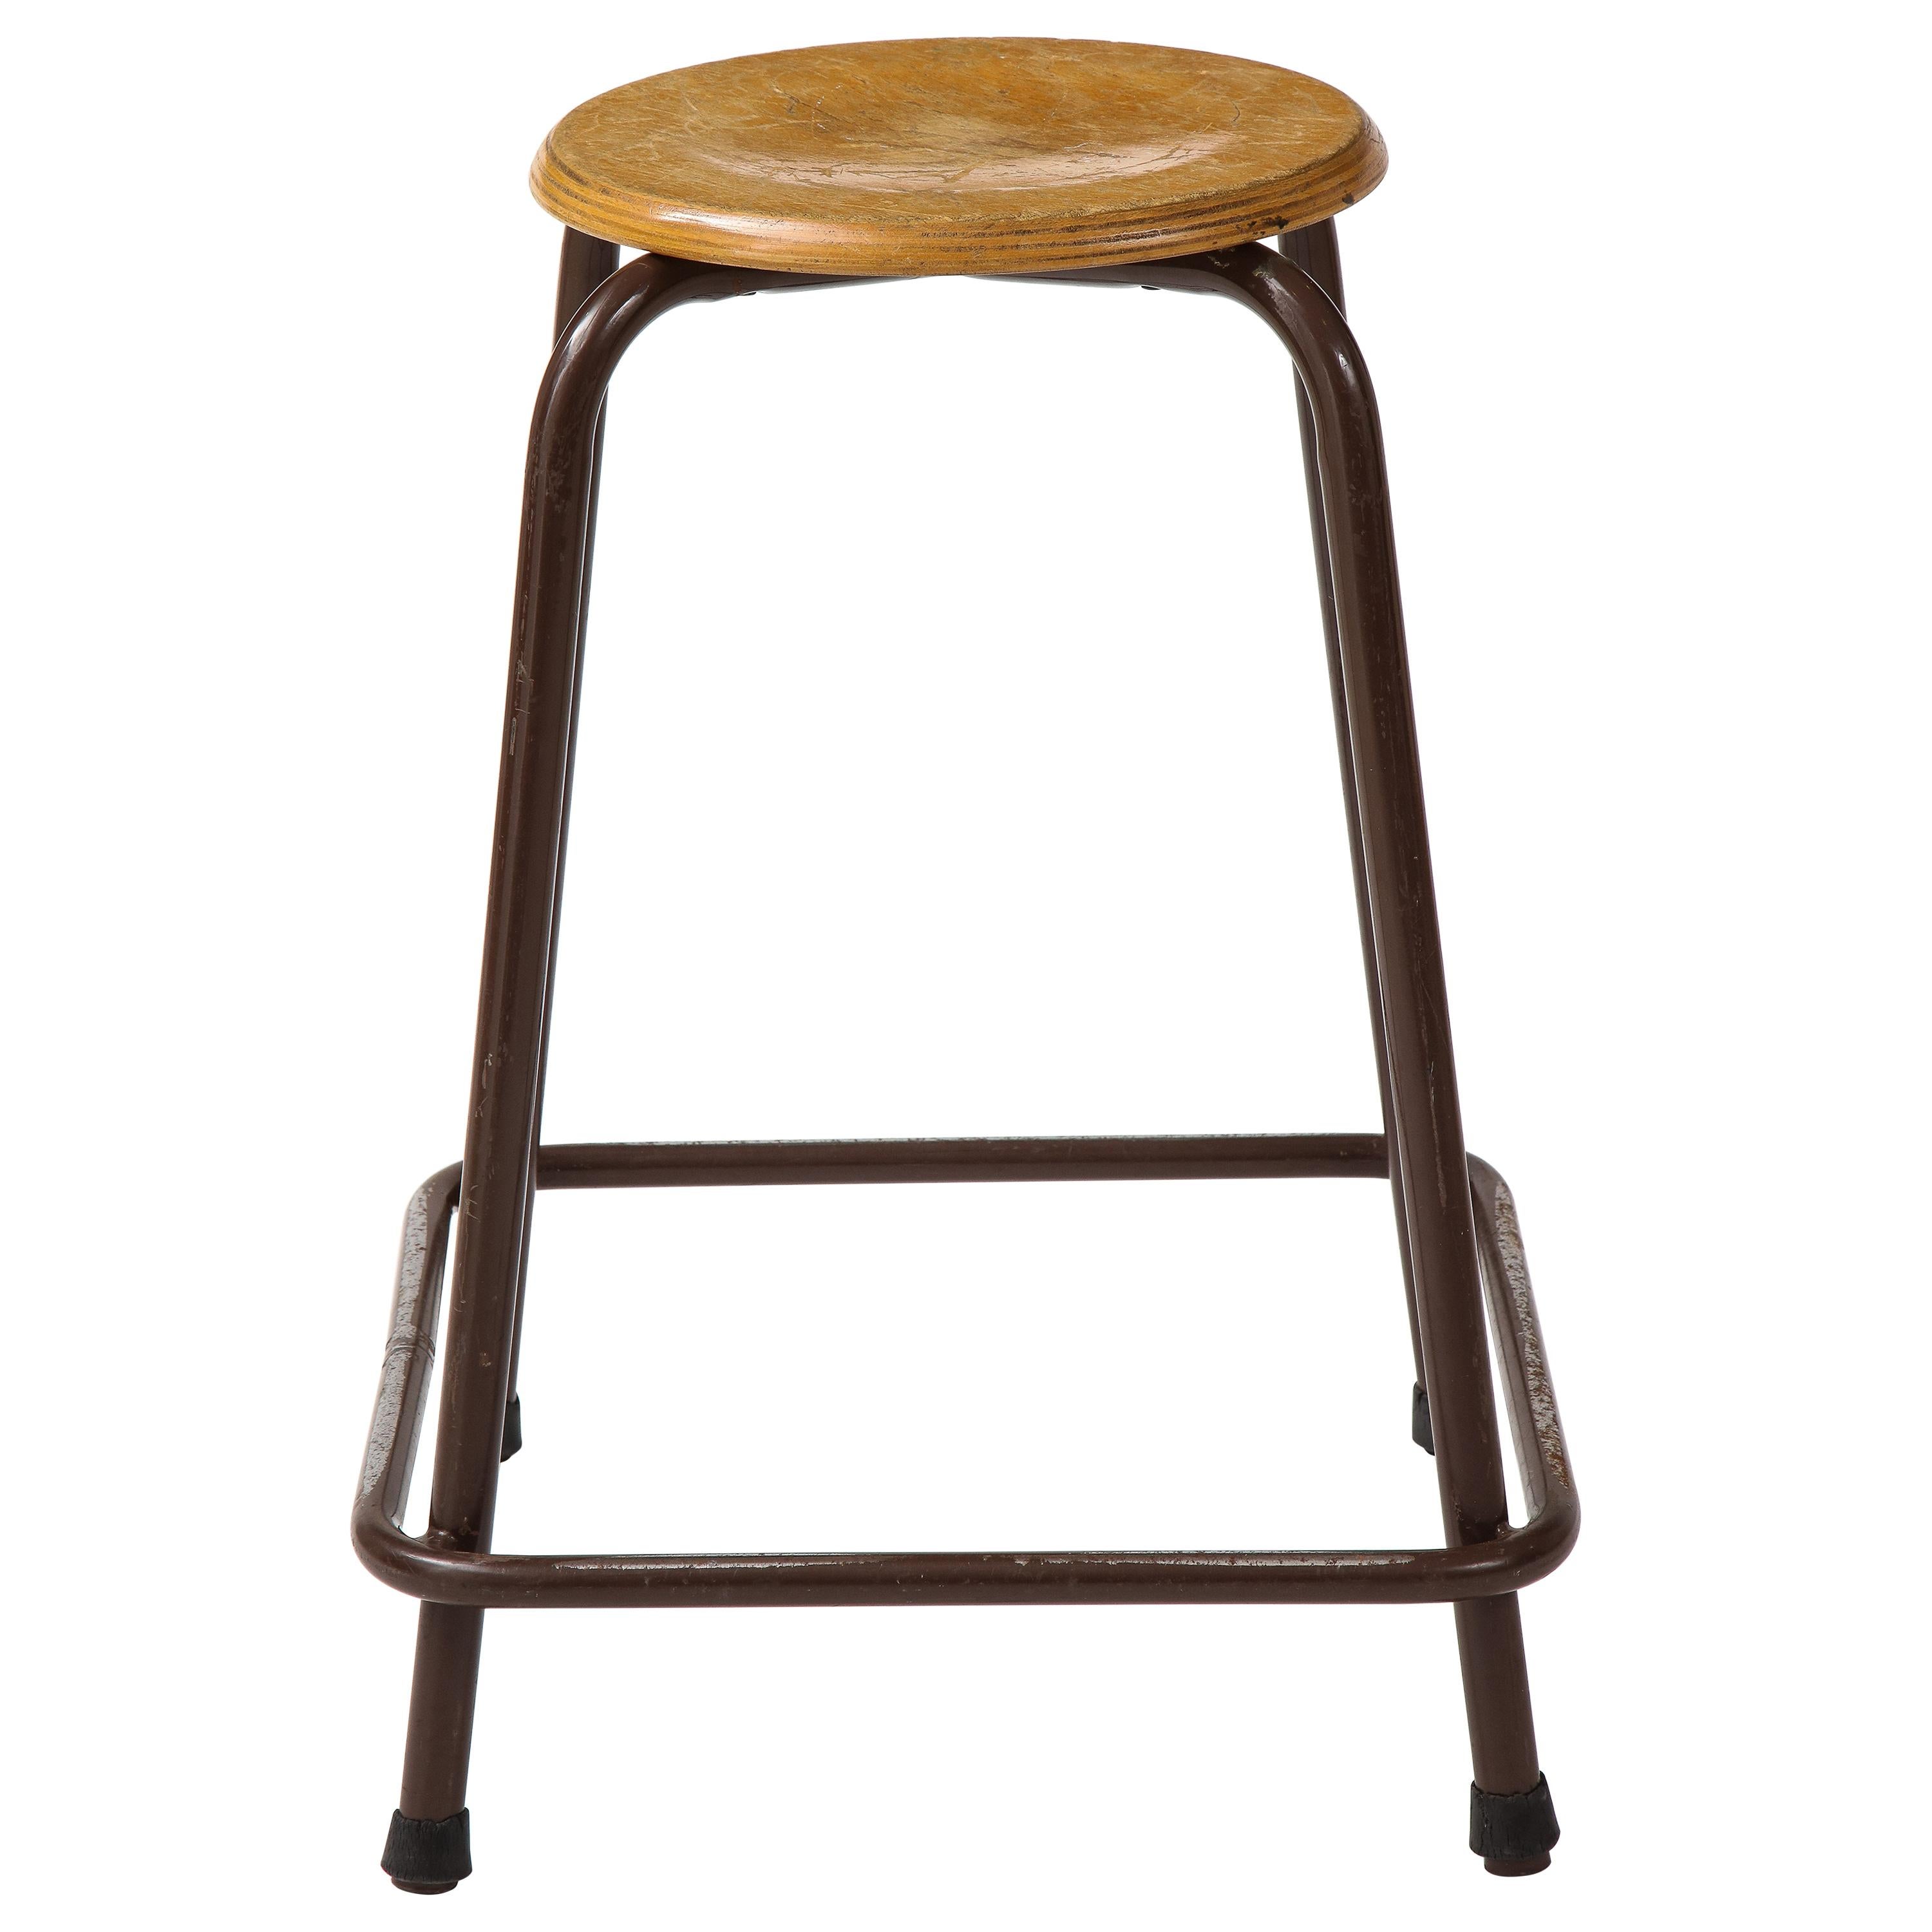 French Stool with a Wood Seat & Metal Base, c. 1950